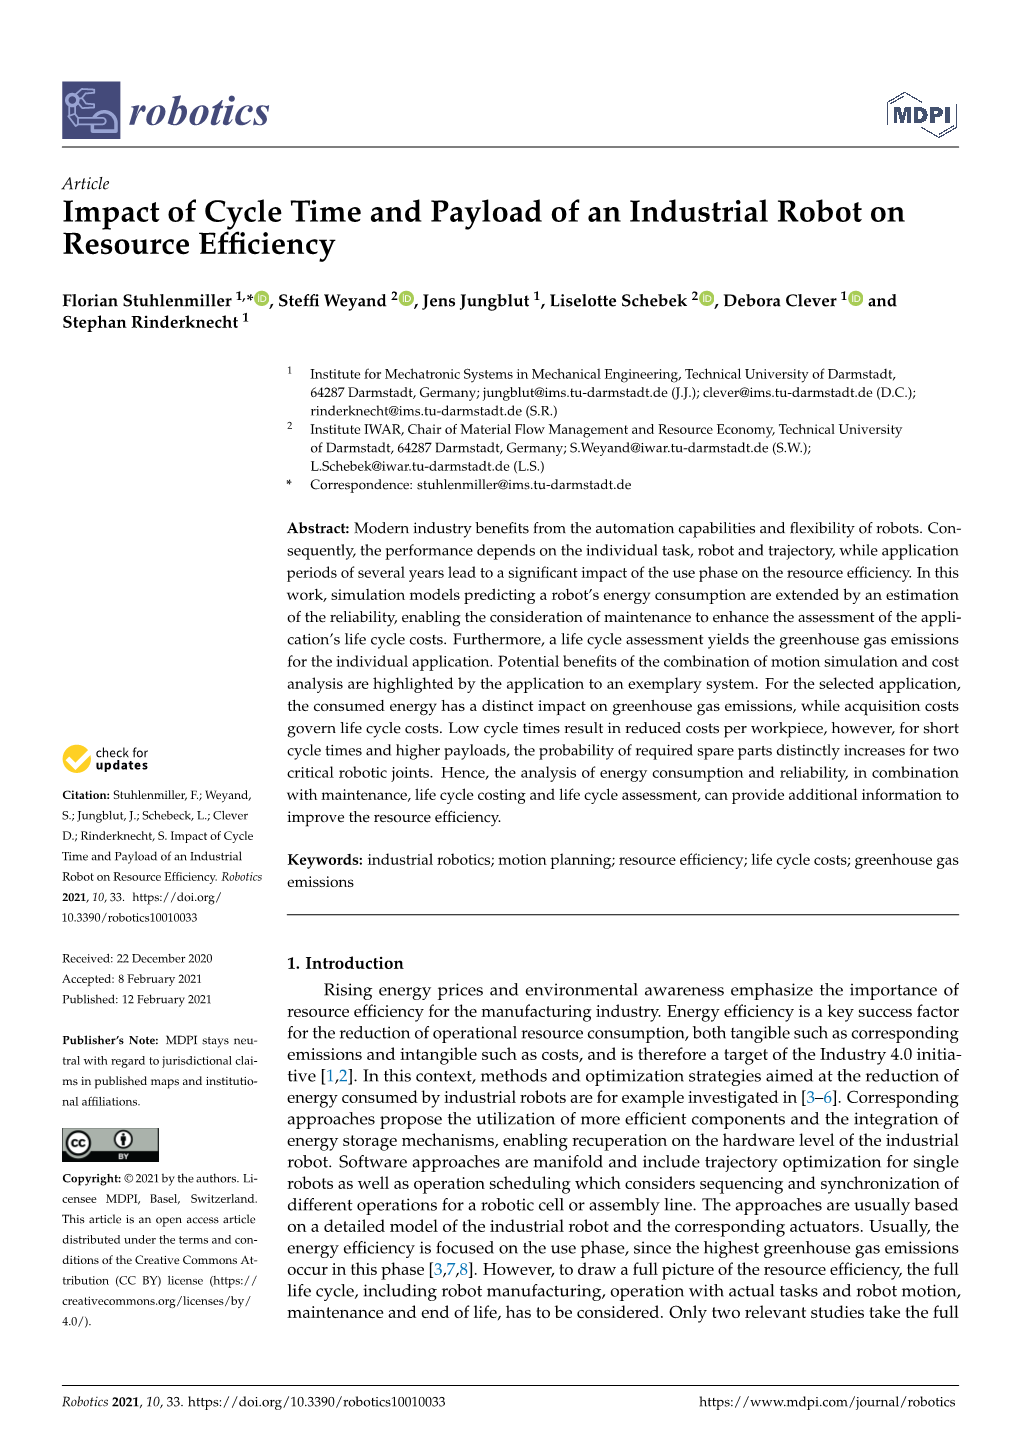 Impact of Cycle Time and Payload of an Industrial Robot on Resource Efﬁciency